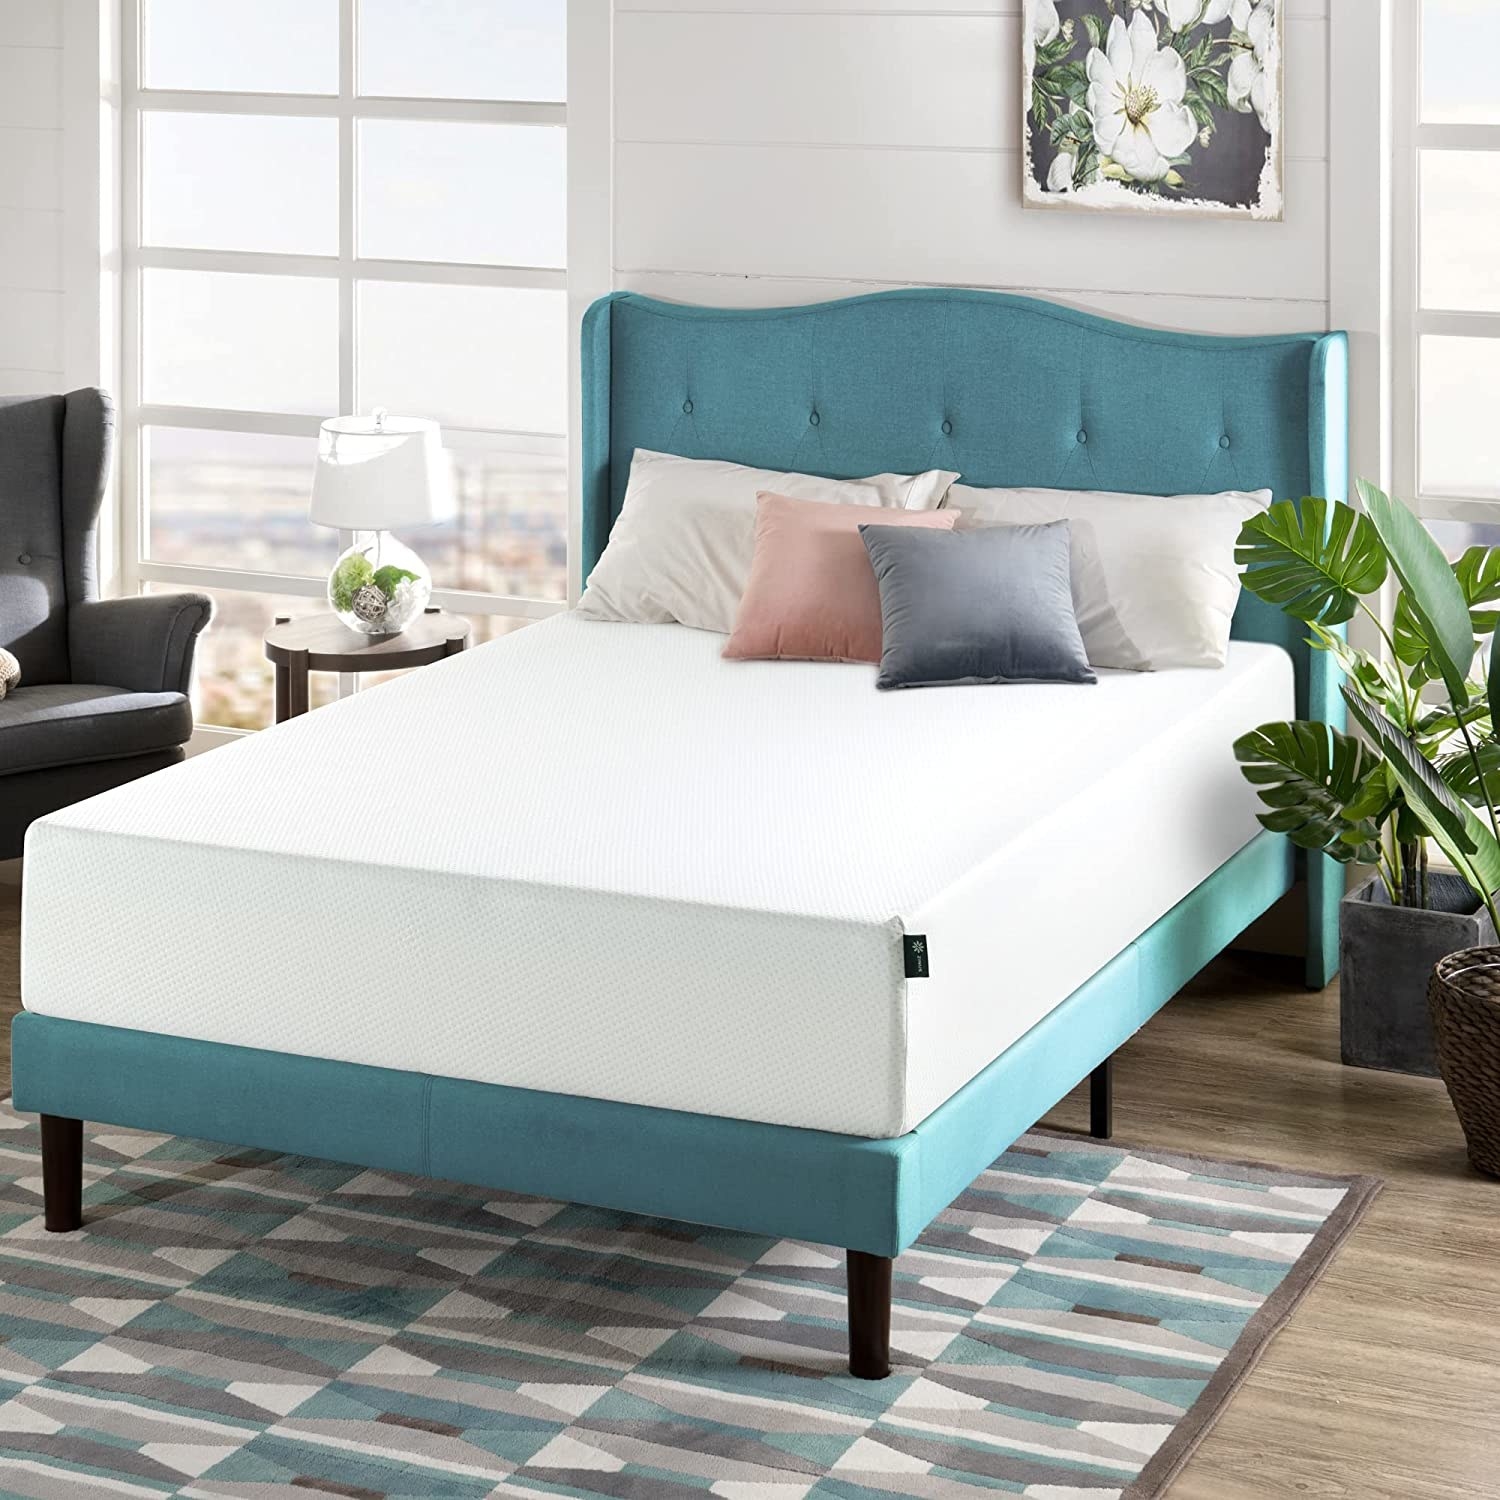 the white mattress on a teal bed frame